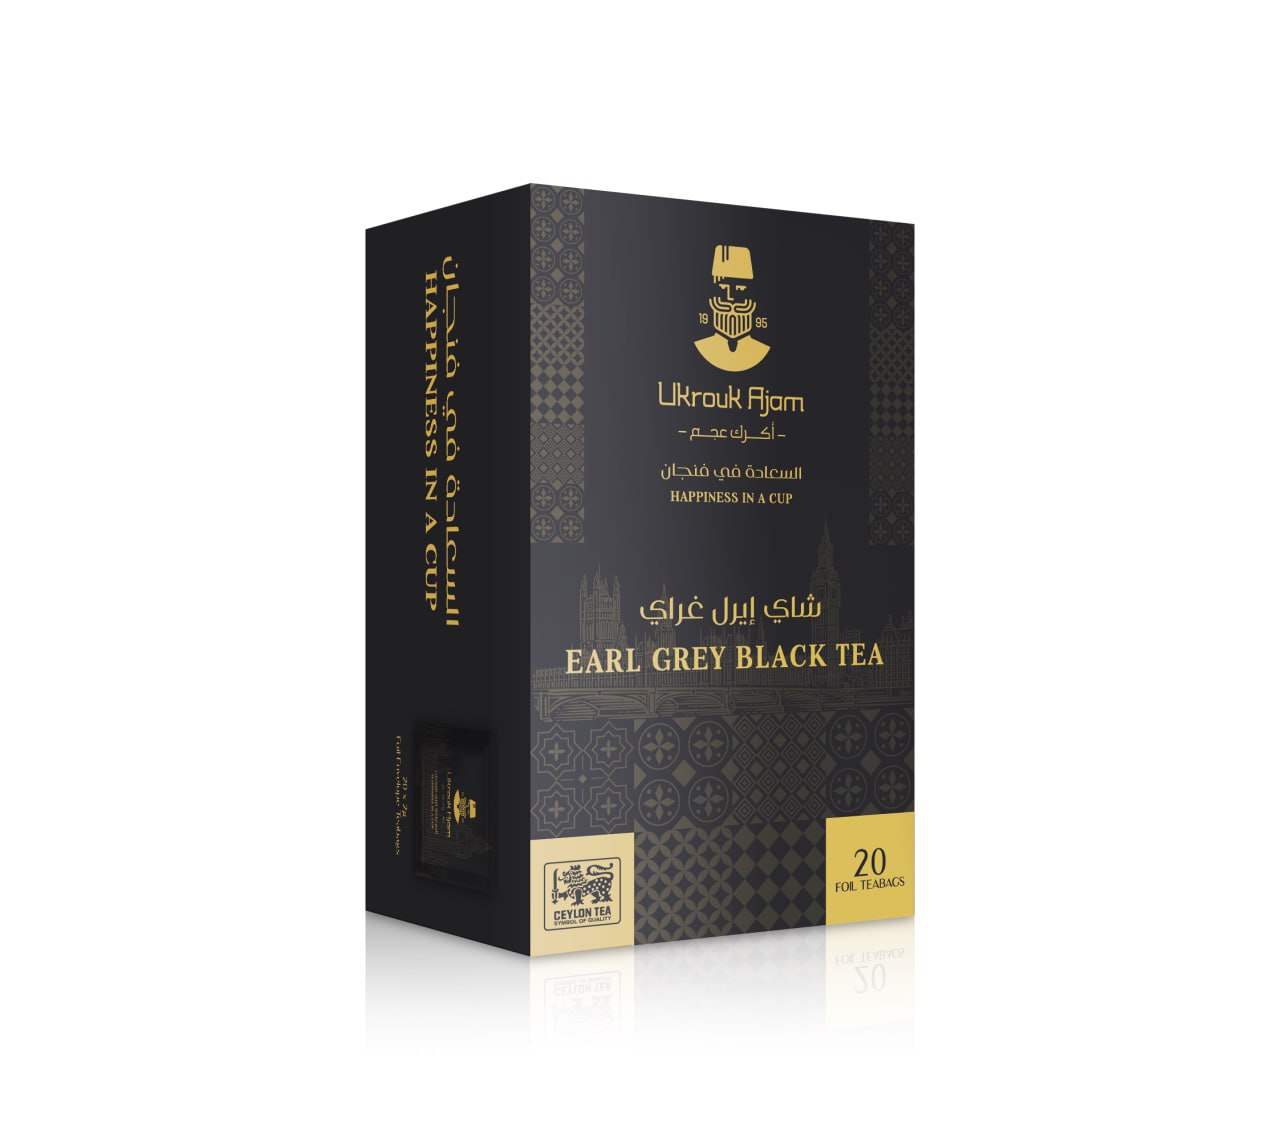 Ukrouk Ajam Earl Grey Black Tea in a luxurious black box of 20 foil teabags, featuring golden arabesque patterns and both Arabic and English branding, symbolizing 'Happiness in a Cup.